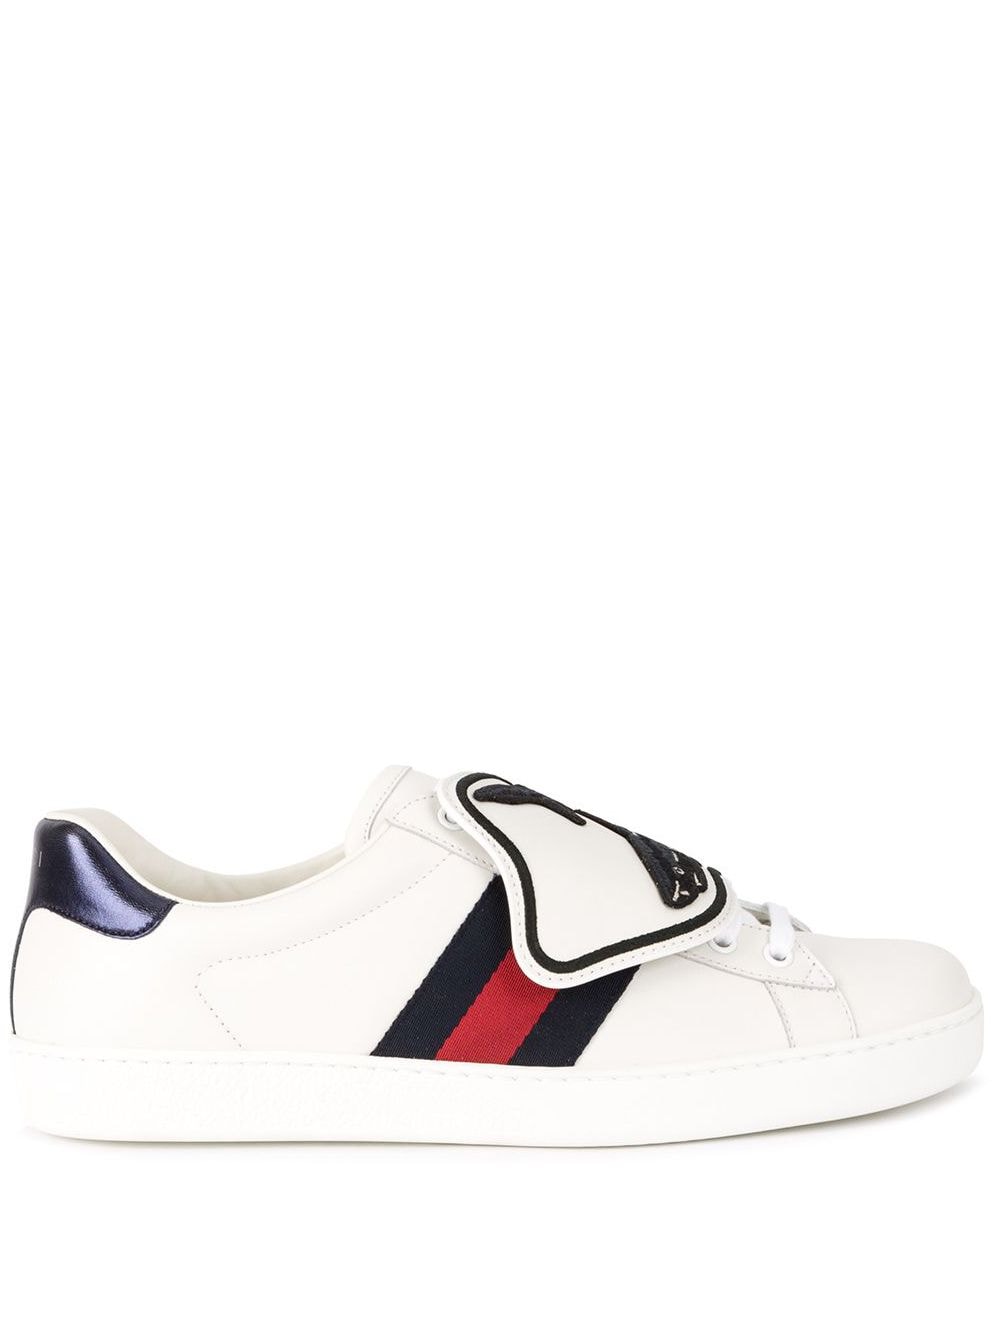 Gucci Sneaker With Removable Patches Farfetch